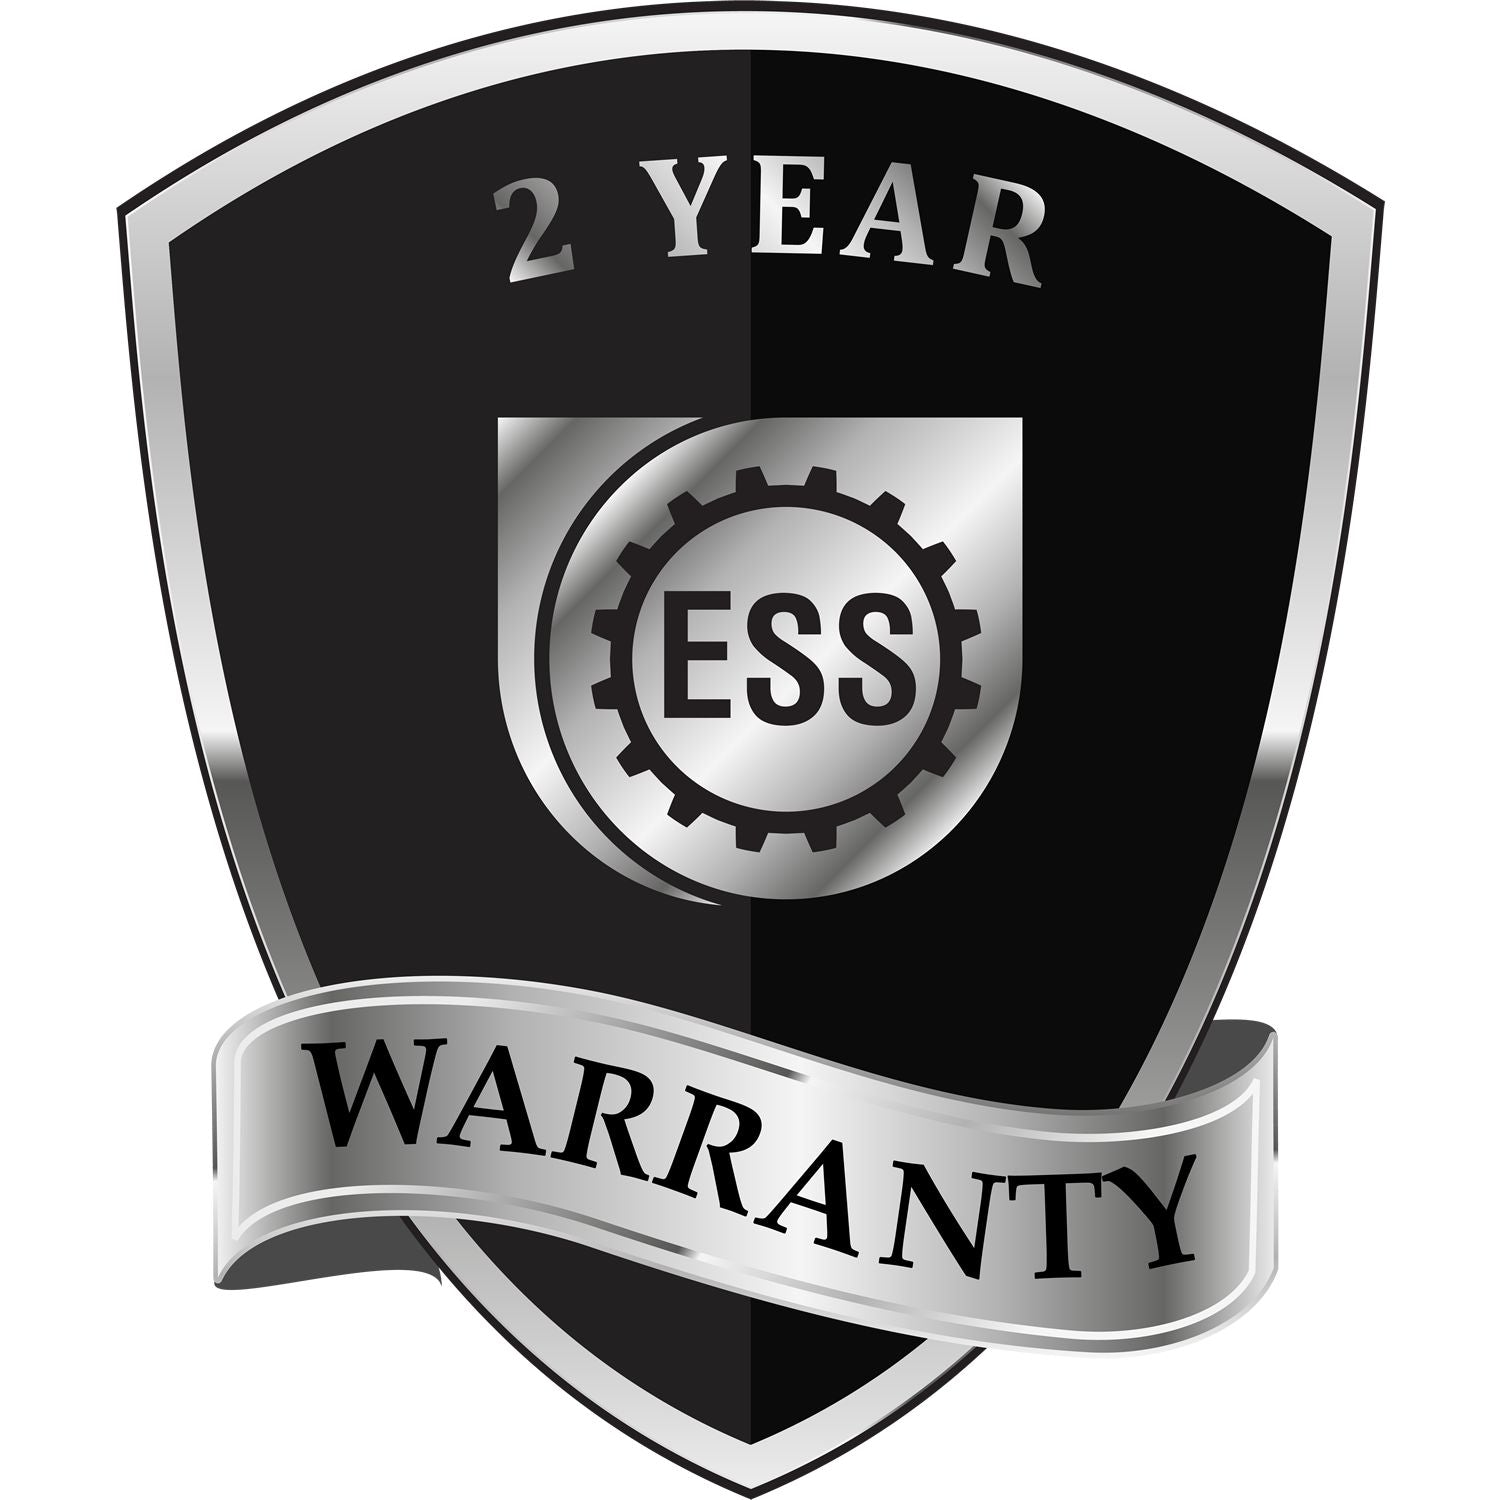 A badge or emblem showing a warranty icon for the Kentucky Desk Landscape Architectural Seal Embosser